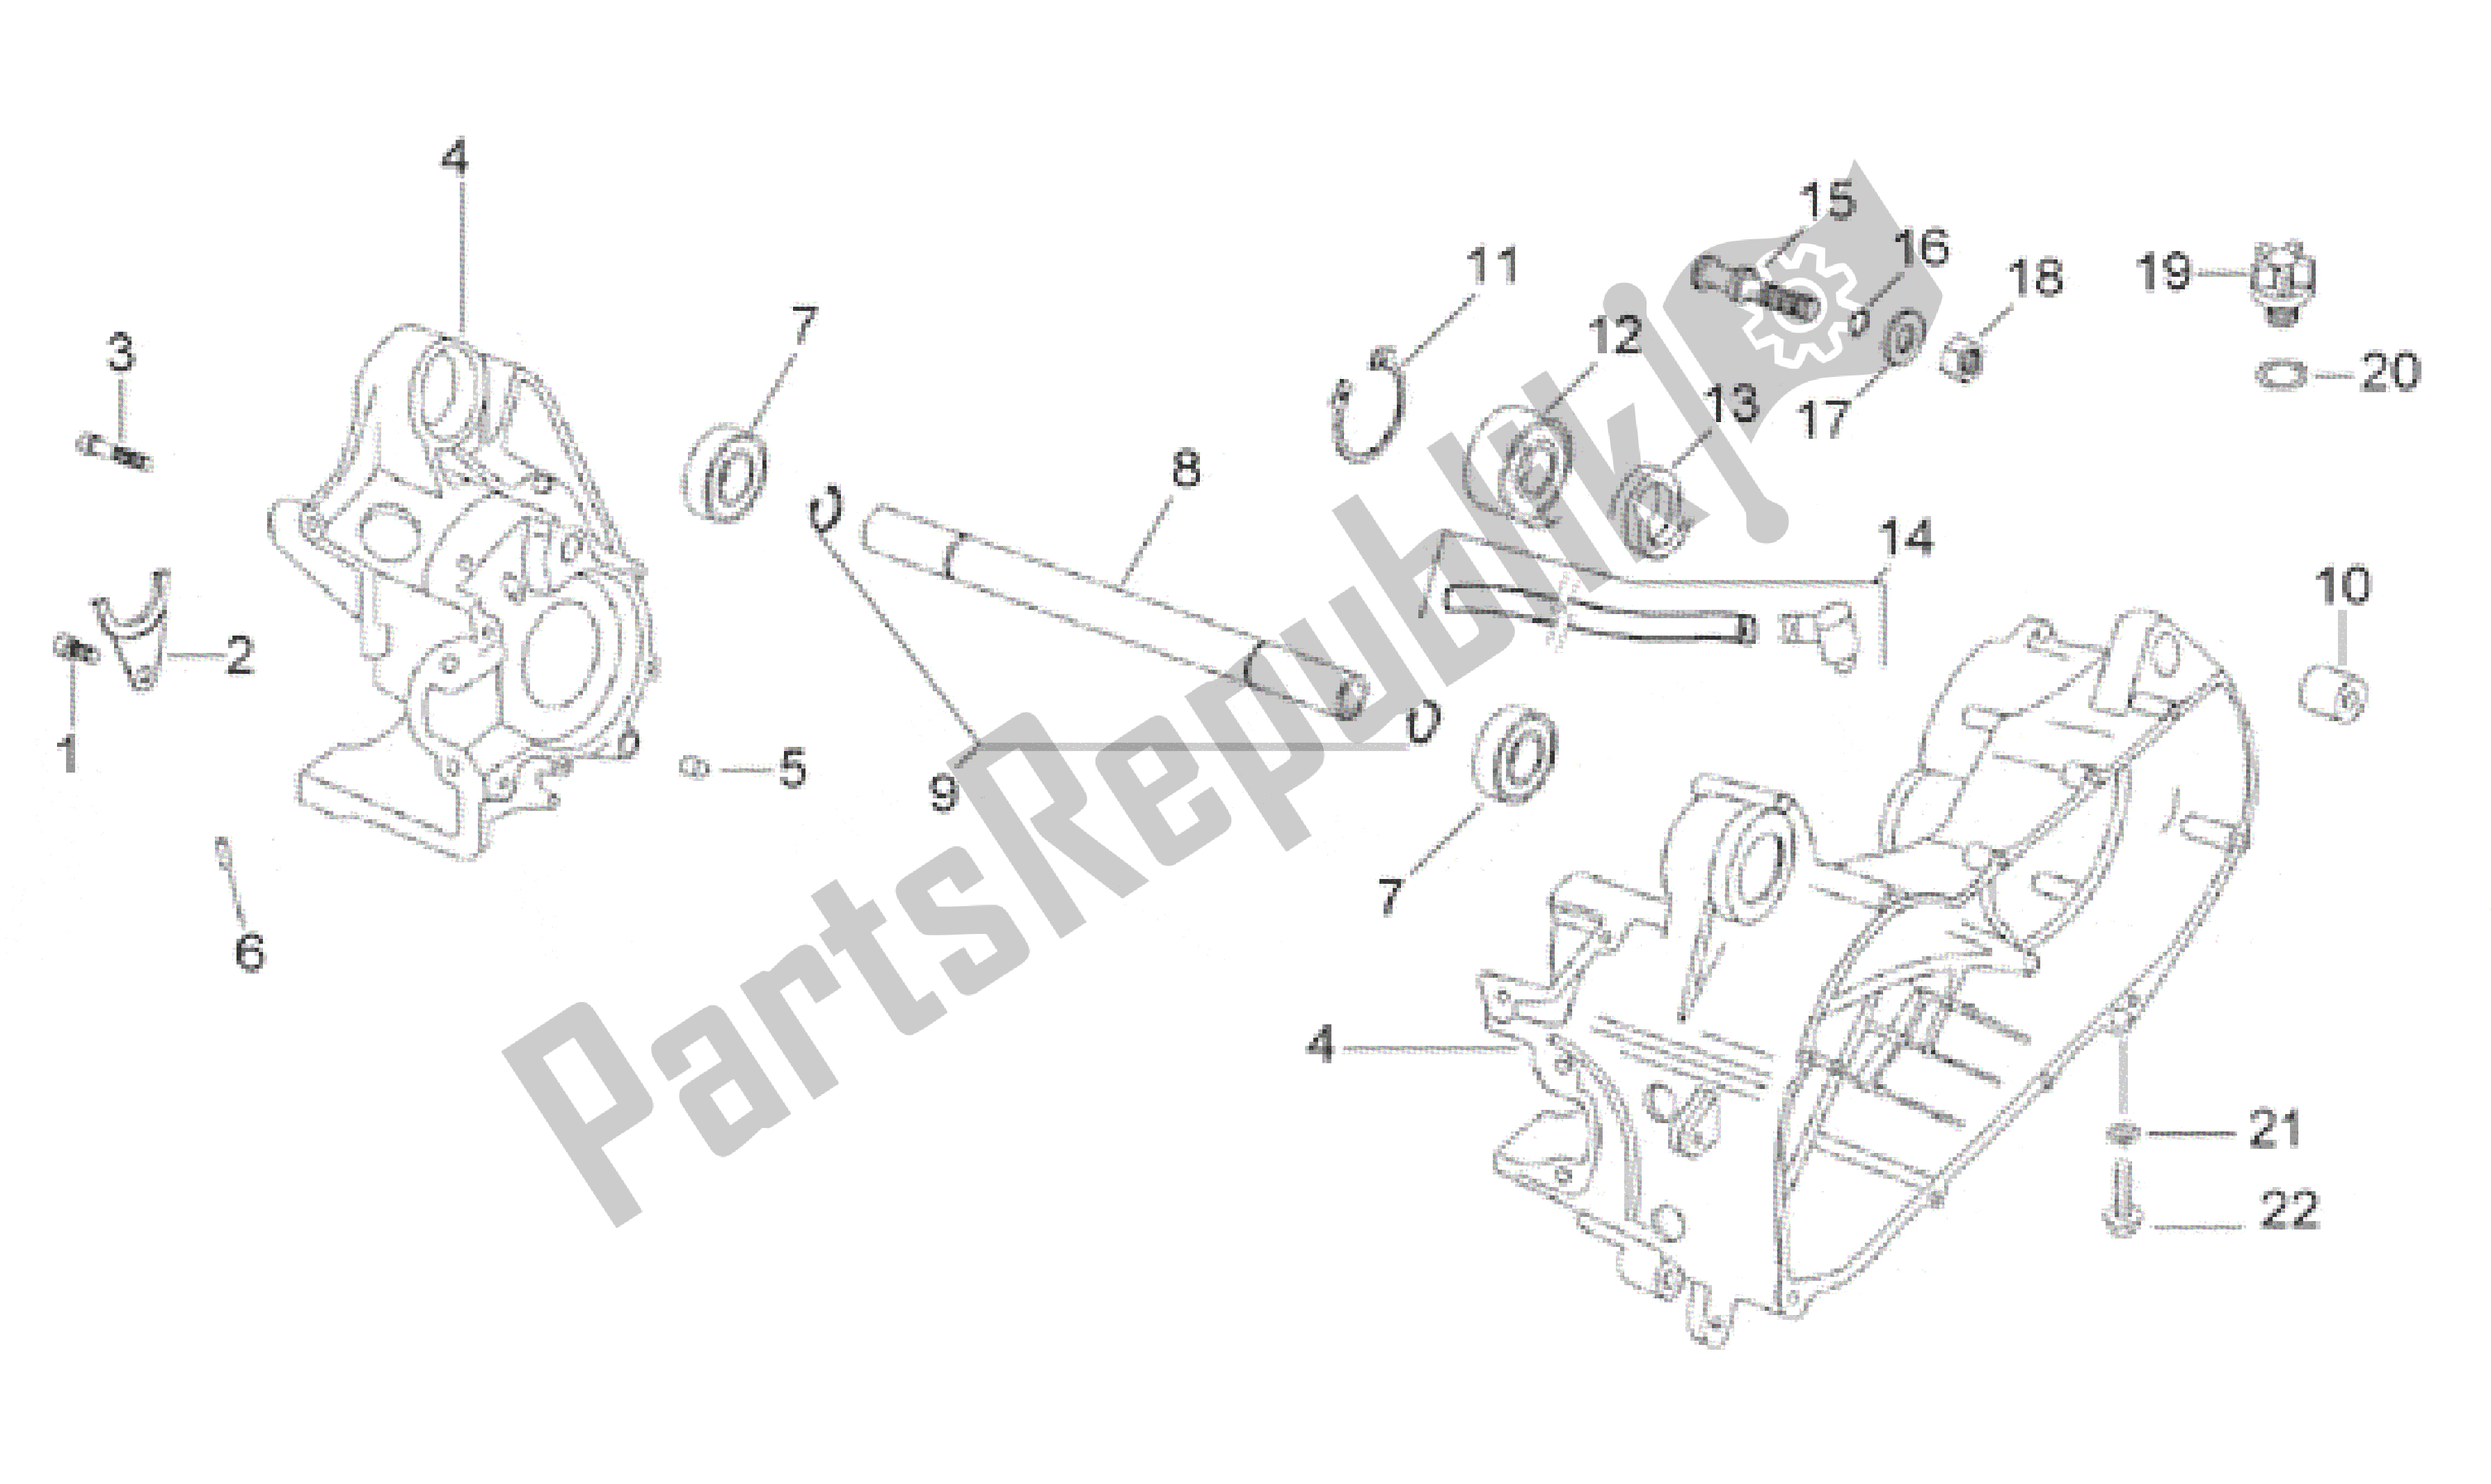 All parts for the Central Crank-case Set of the Aprilia Scarabeo 50 2000 - 2005